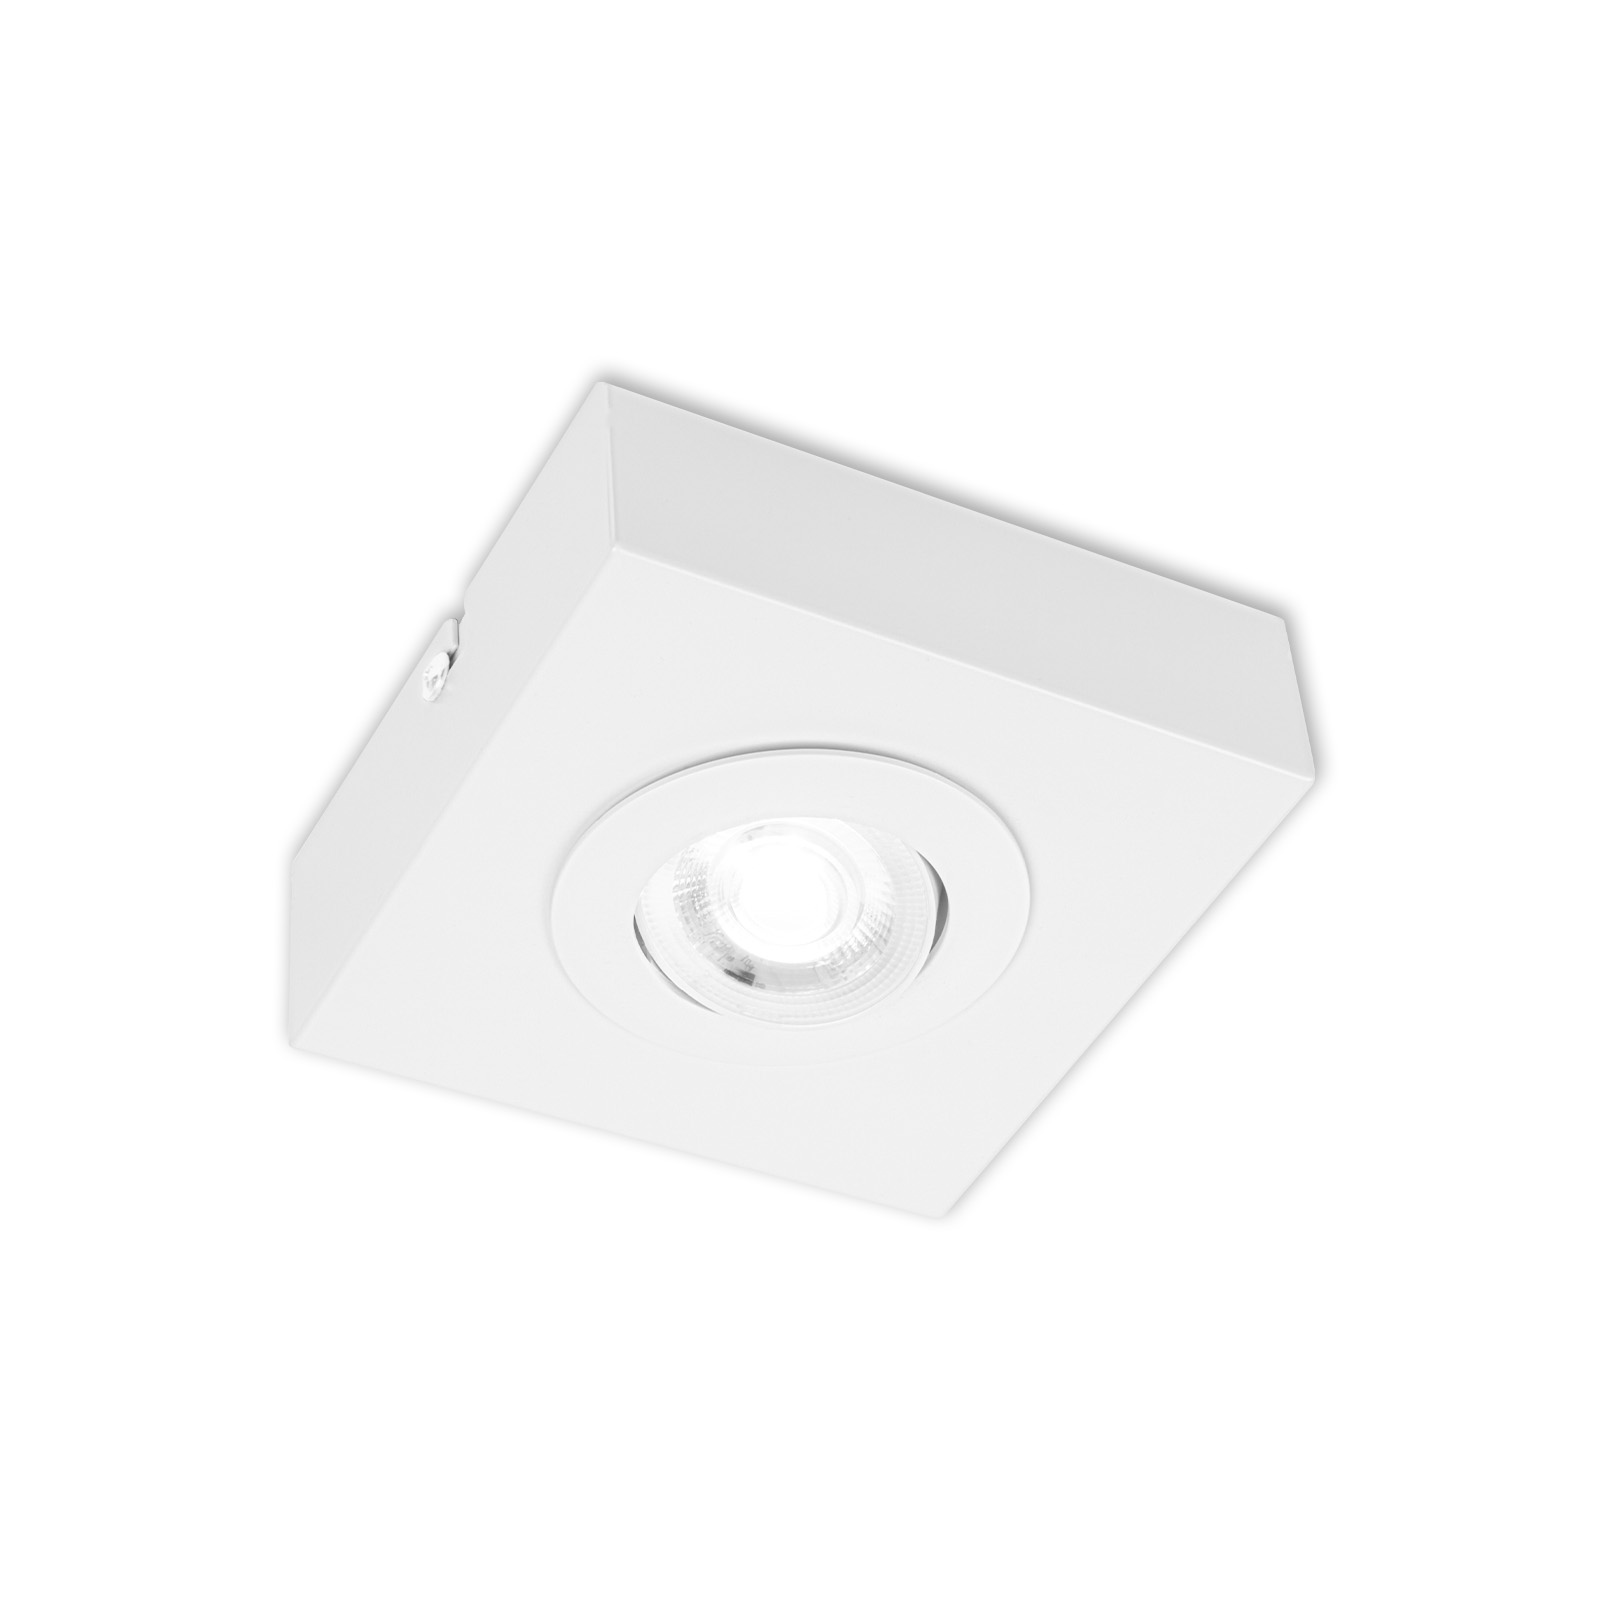 CTS ceiling light, 12 cm, 4W, 460lm, white